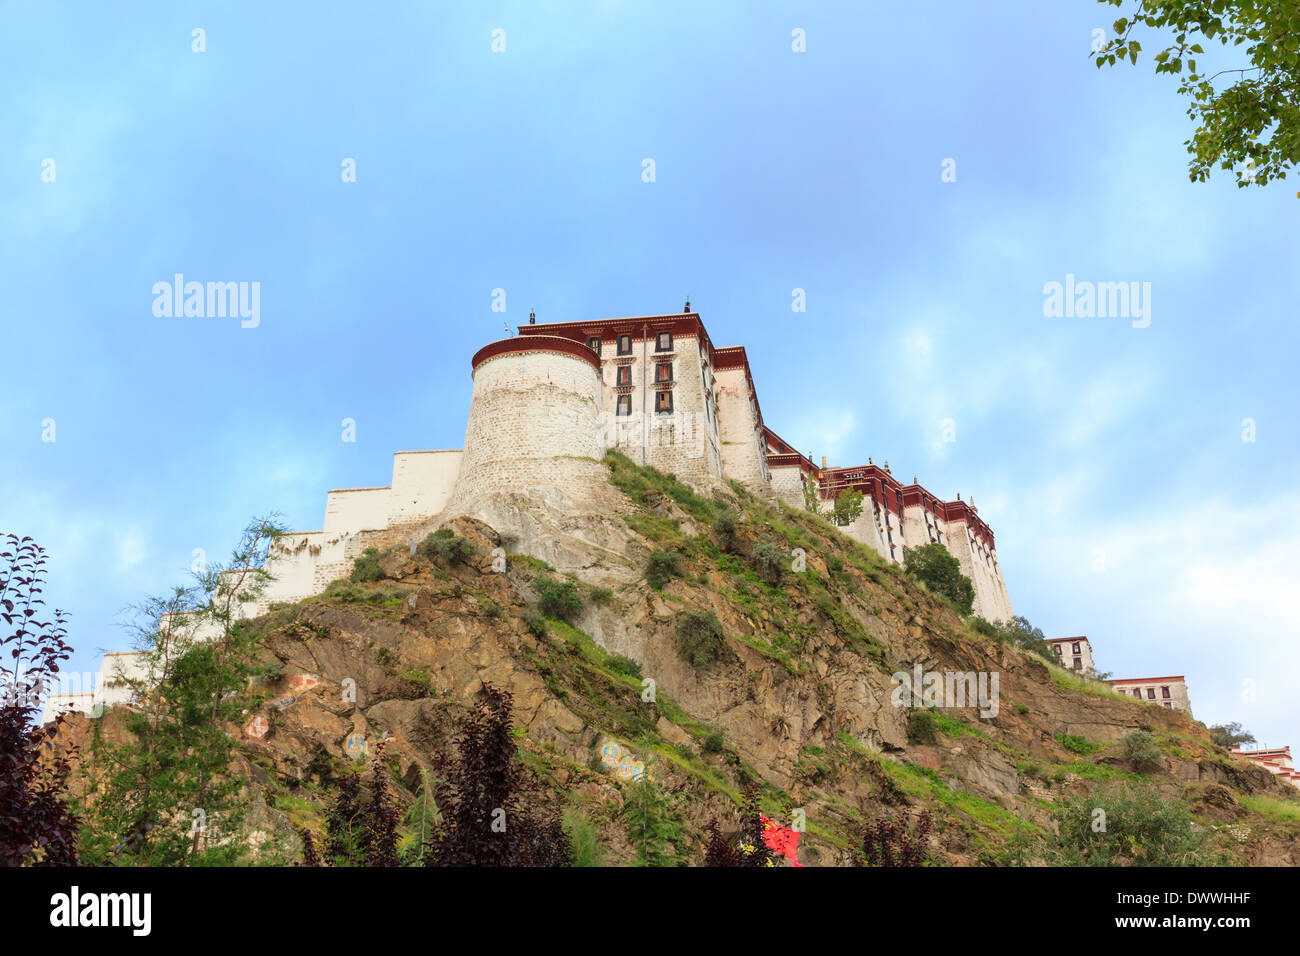 East side of the Potala palace and former residence of the Dalai Lama in Lhasa, Tibet Stock Photo